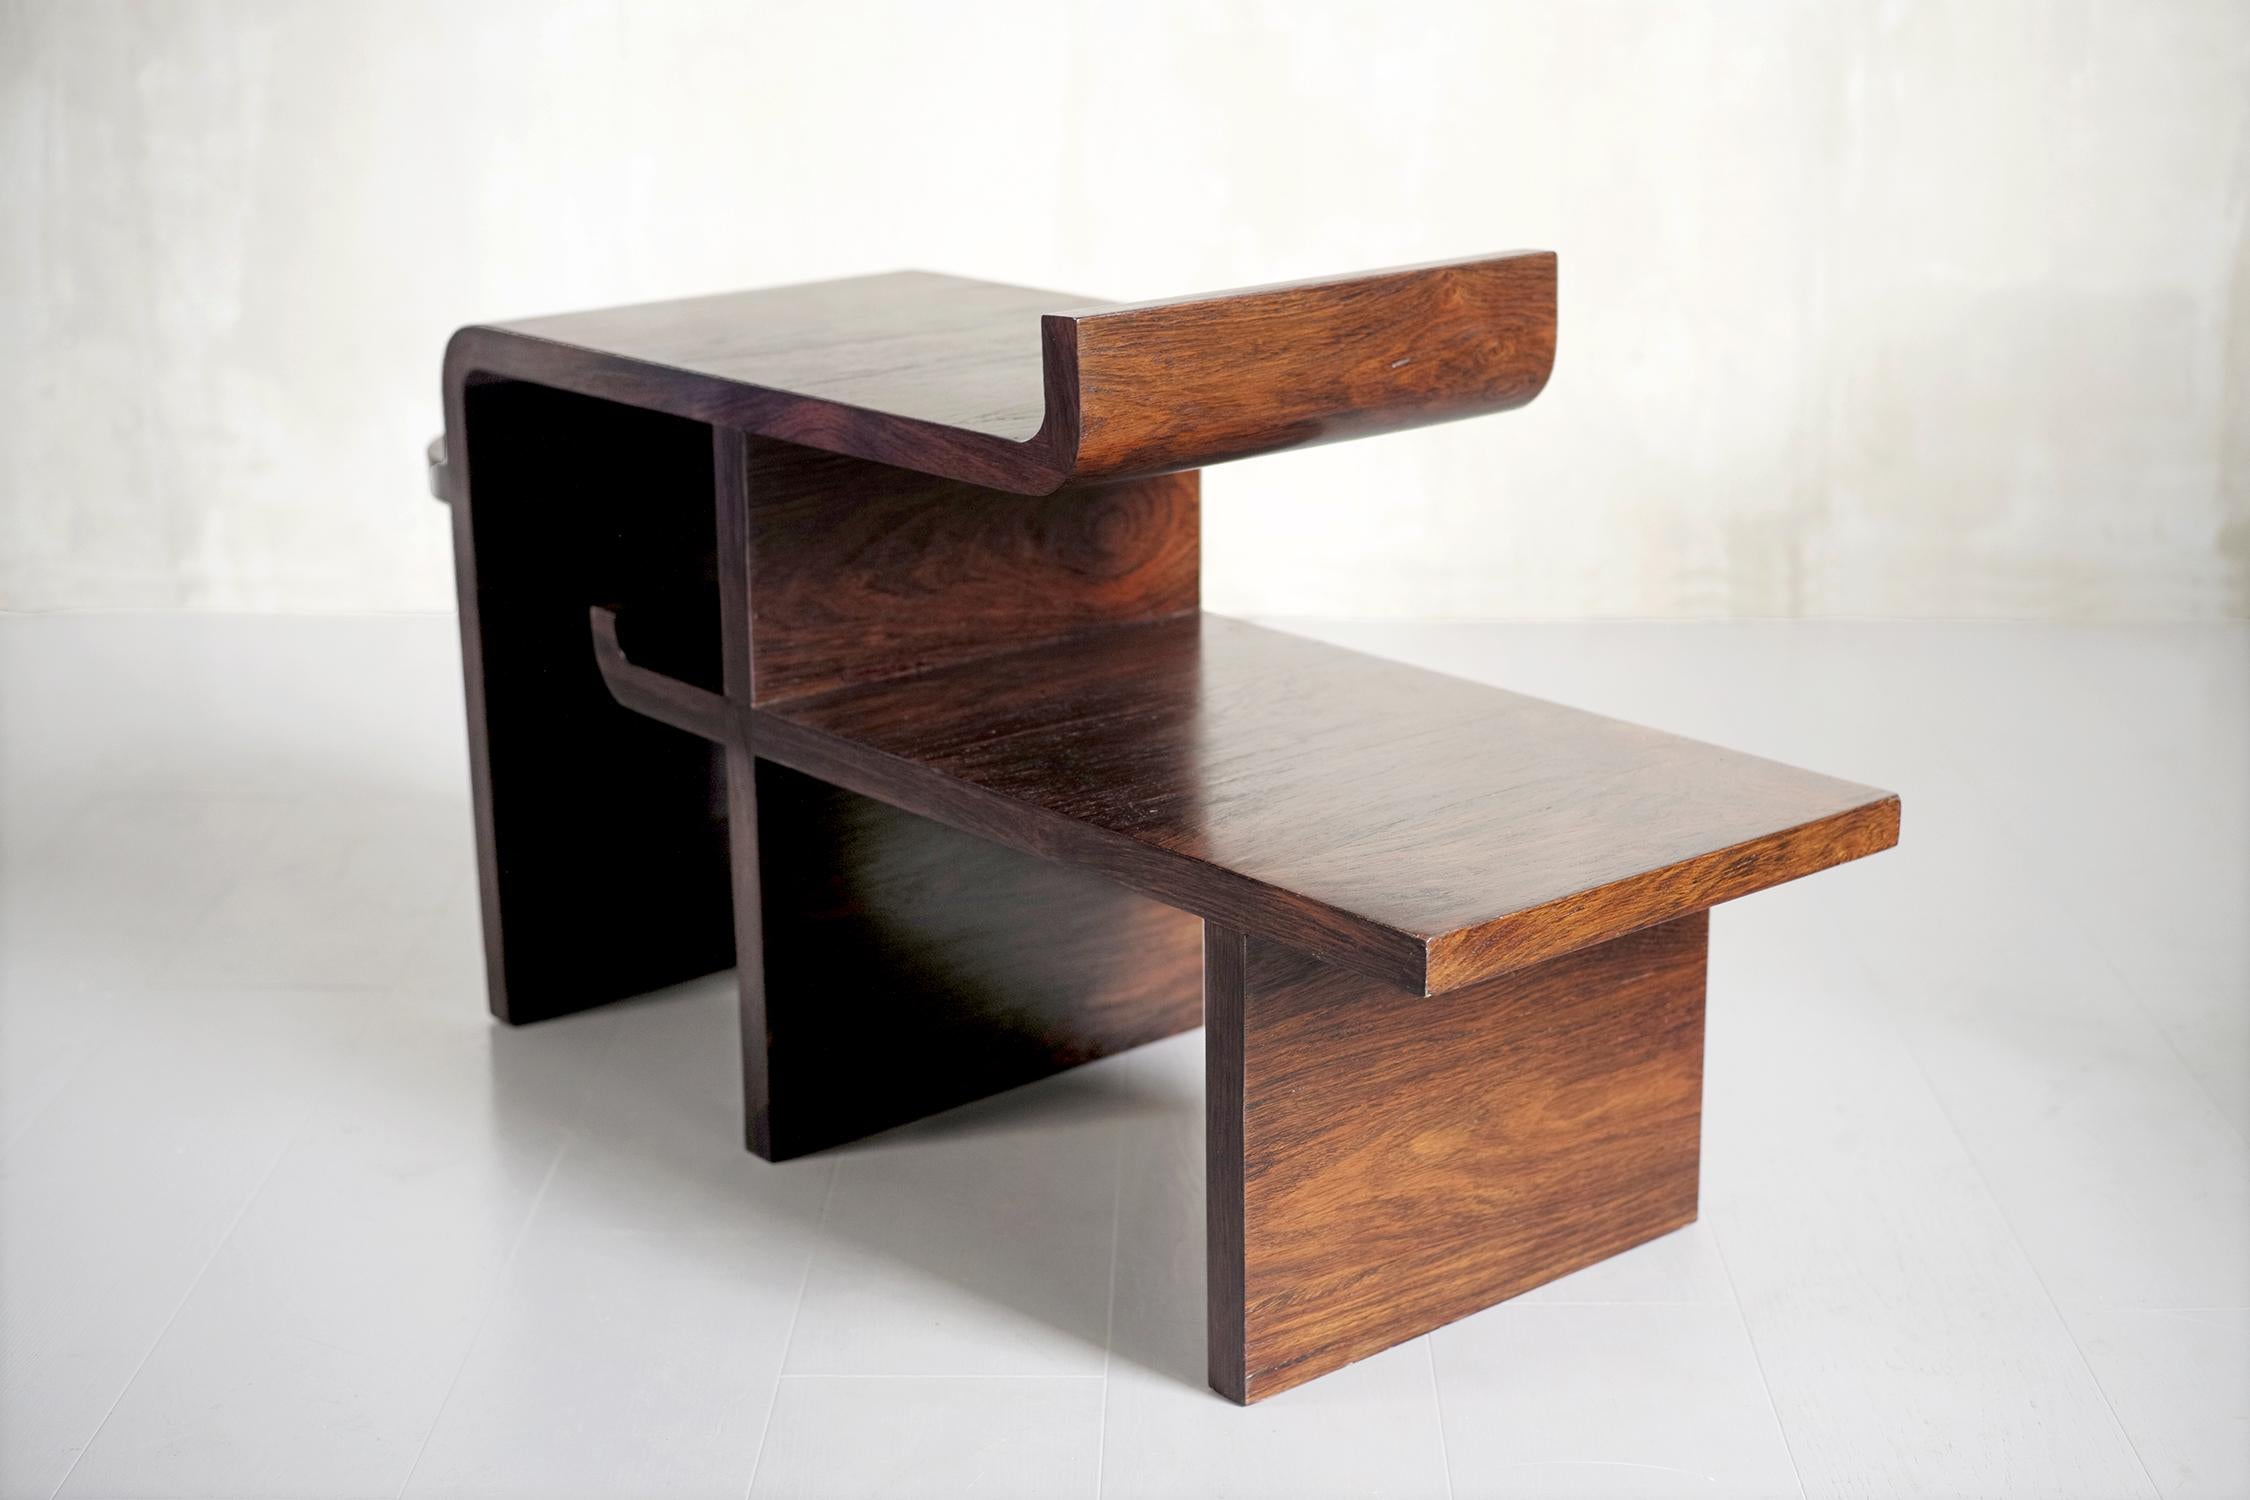 European Modernist Coffee Table, 1930 For Sale